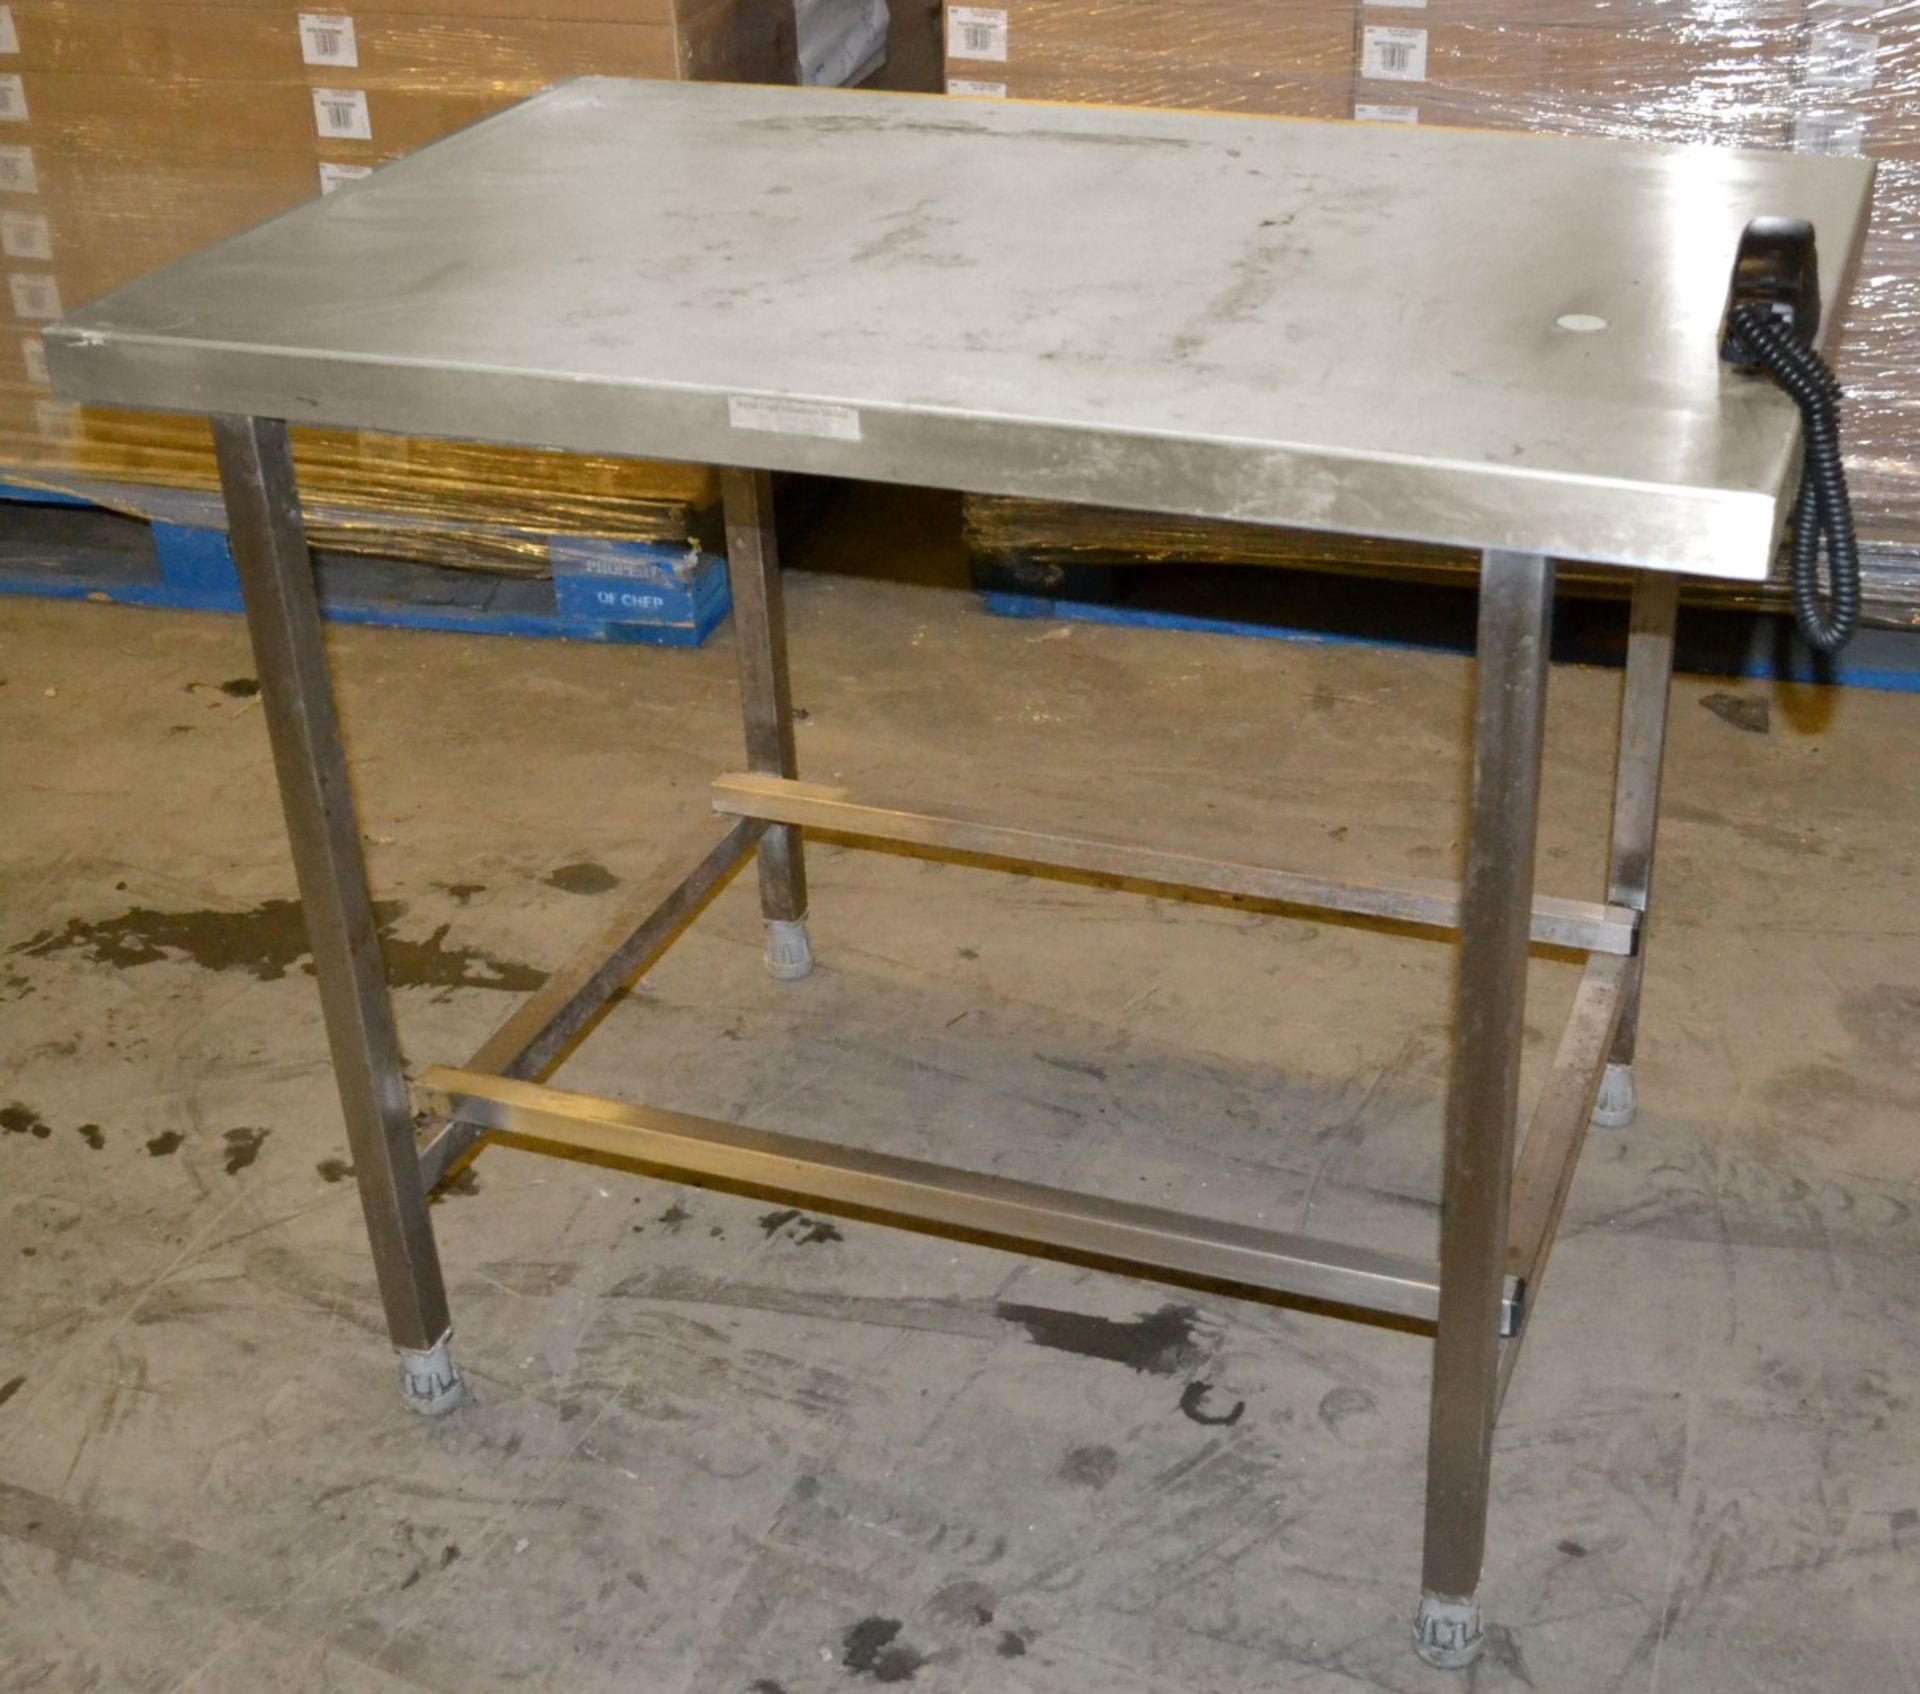 1 x Stainless Steel Prep Table With S3 Security Tag Device - Dimensions: 93 x 61 x 75cm - Ref: MC137 - Image 2 of 6